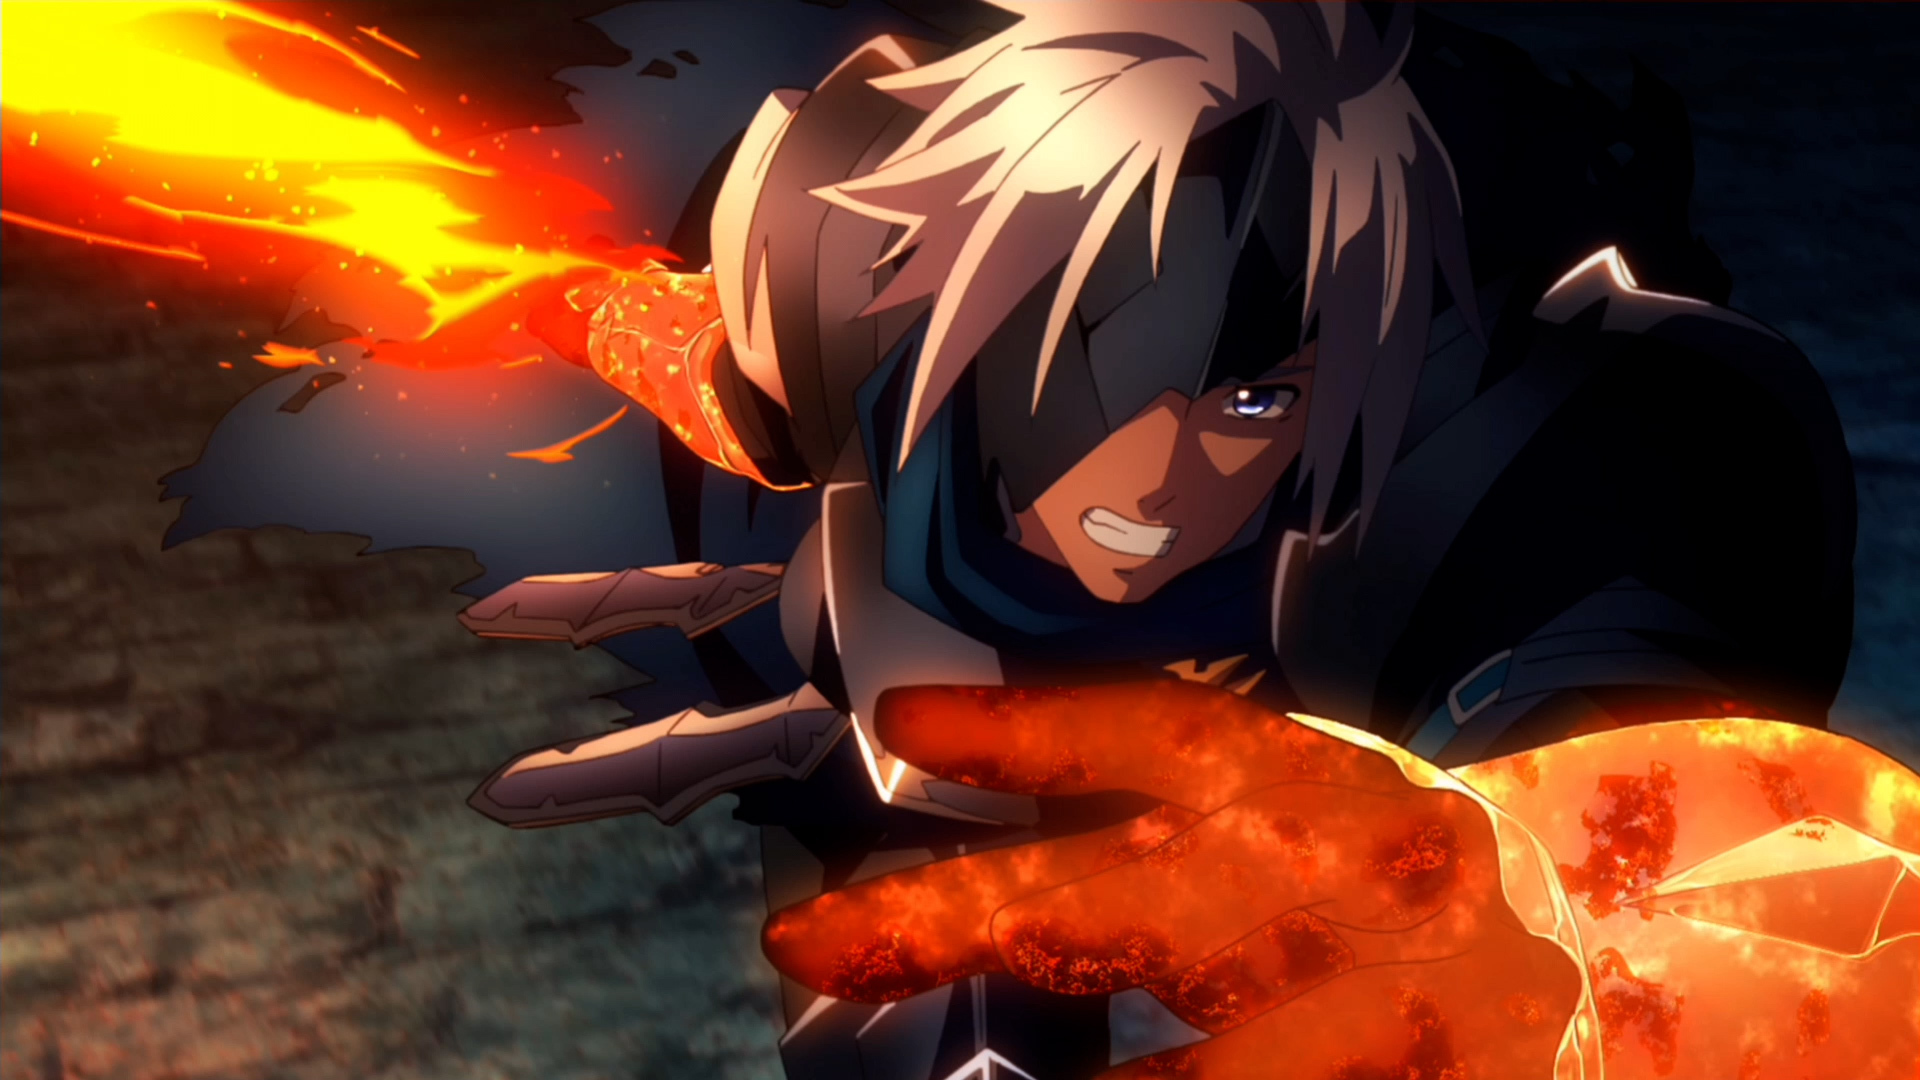 Bandai Namco and ufotable share the opening animation for Tales of Arise